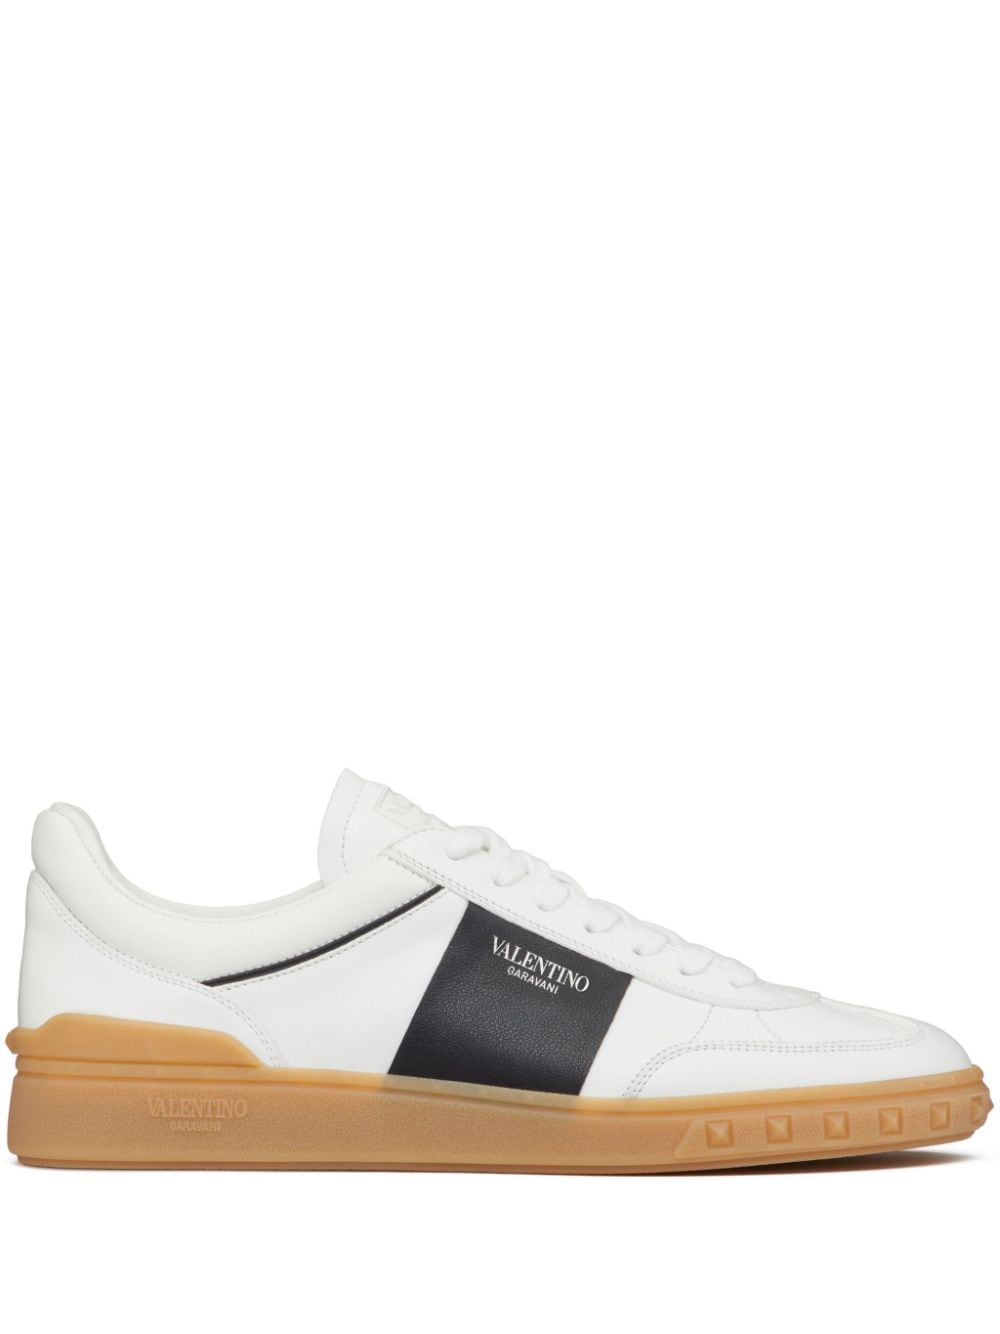 Upvillage leather sneakers<BR/><BR/><BR/>